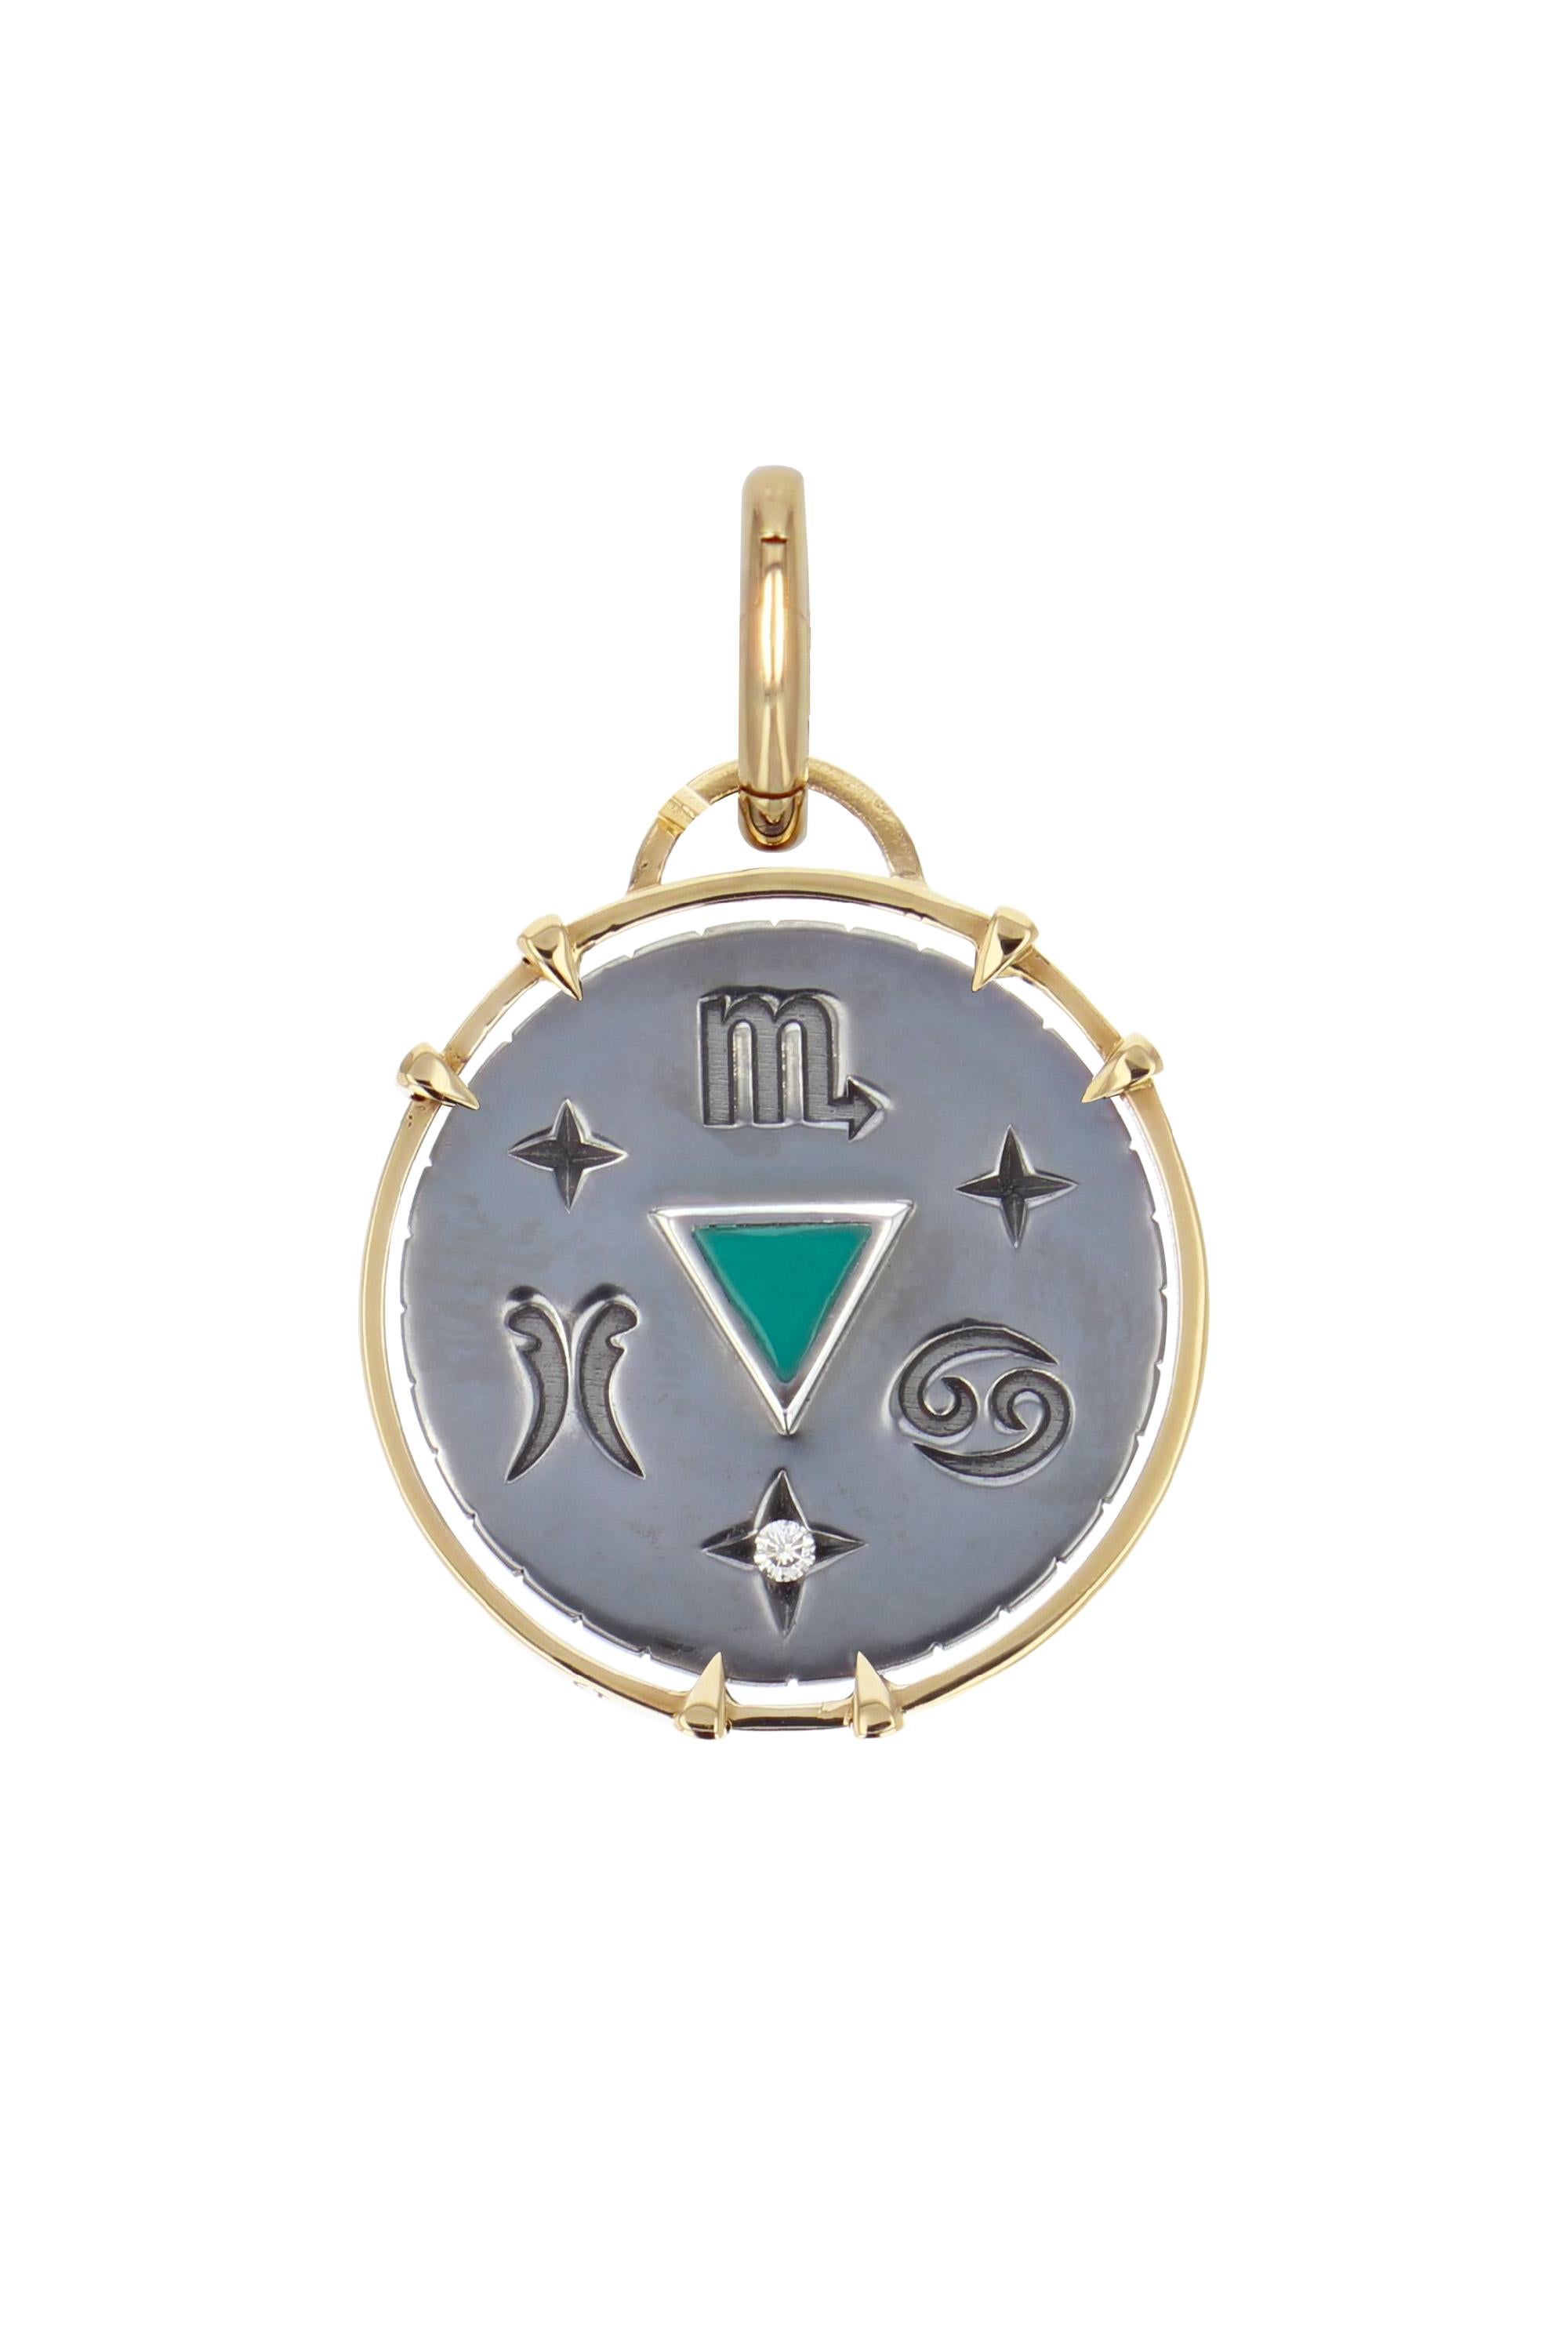 Yellow gold and distressed silver charm. Studded with a diamond, the charm embraces all the symbols linked to the Water sign with a gold heart on its front and the alchemy triangle surrounded by its zodiac signs (Cancer, Scorpio, Pisces) on its